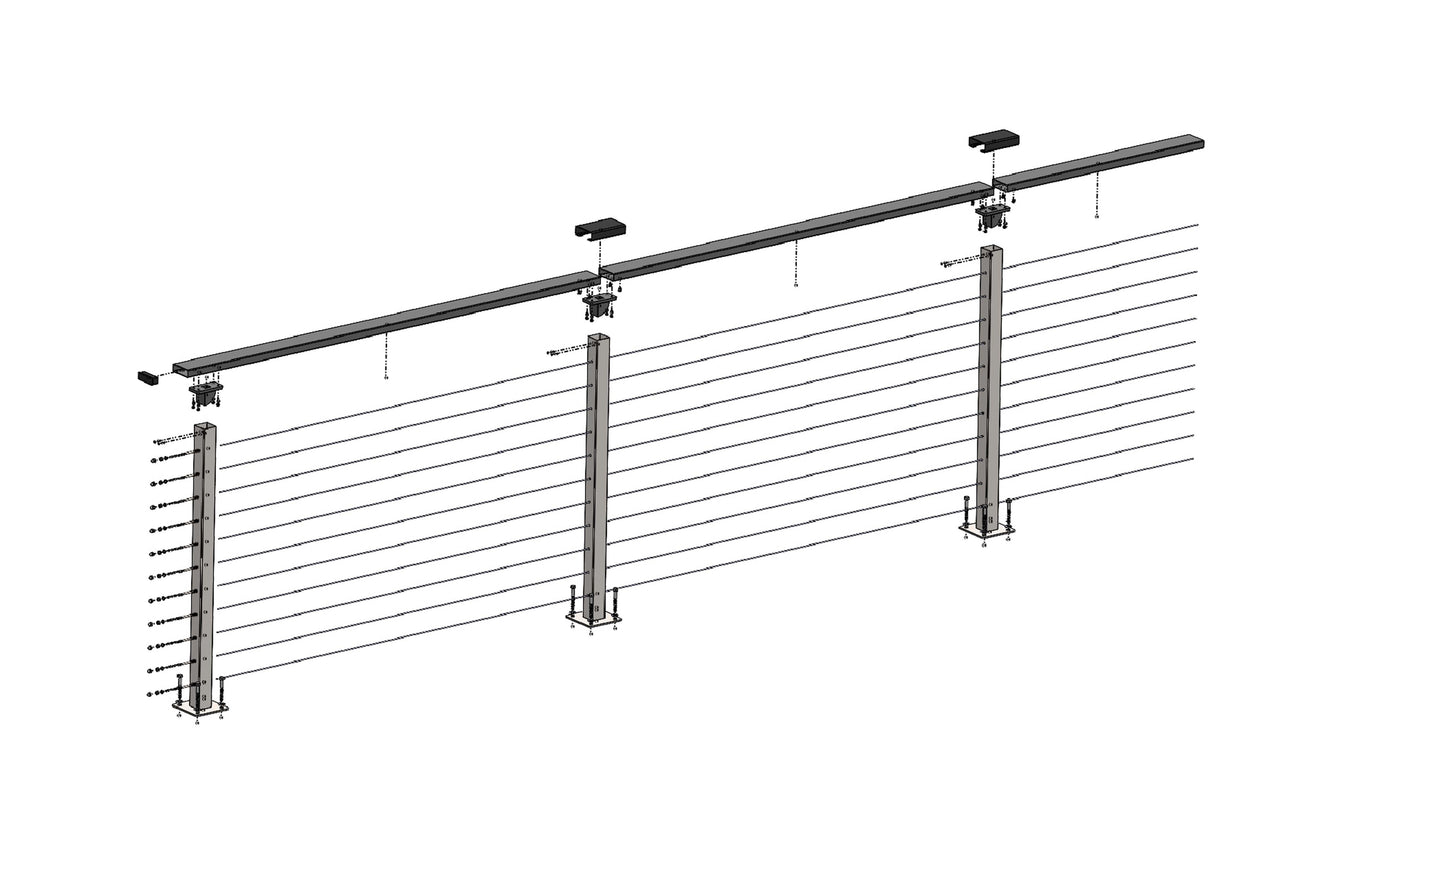 46 ft. x 42 in. Bronze Deck Cable Railing, Base Mount , Stainless